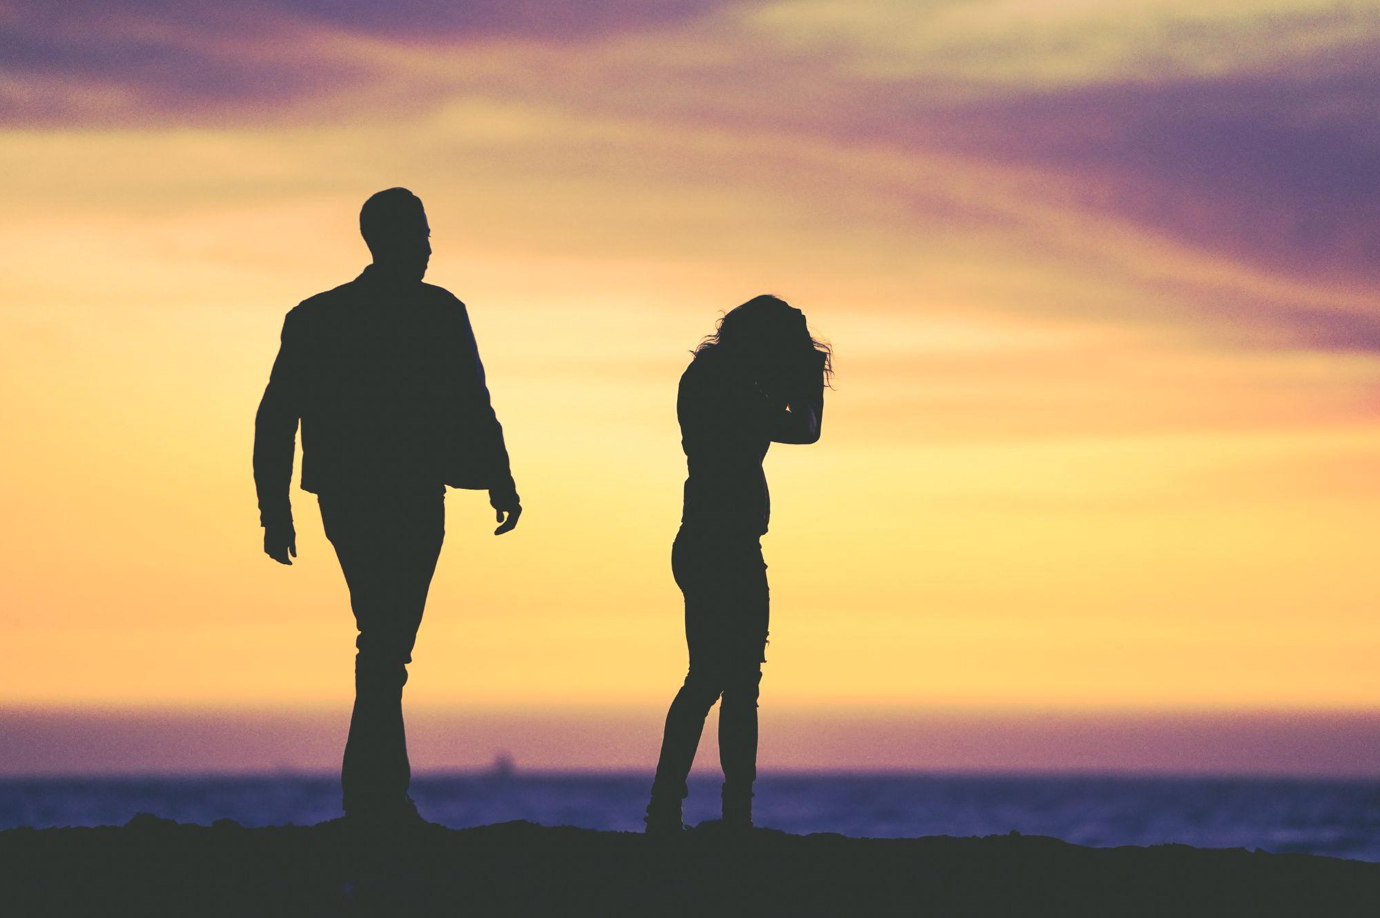 Silhouette of couple against sunset; image by Eric Ward, via Unsplash.com.